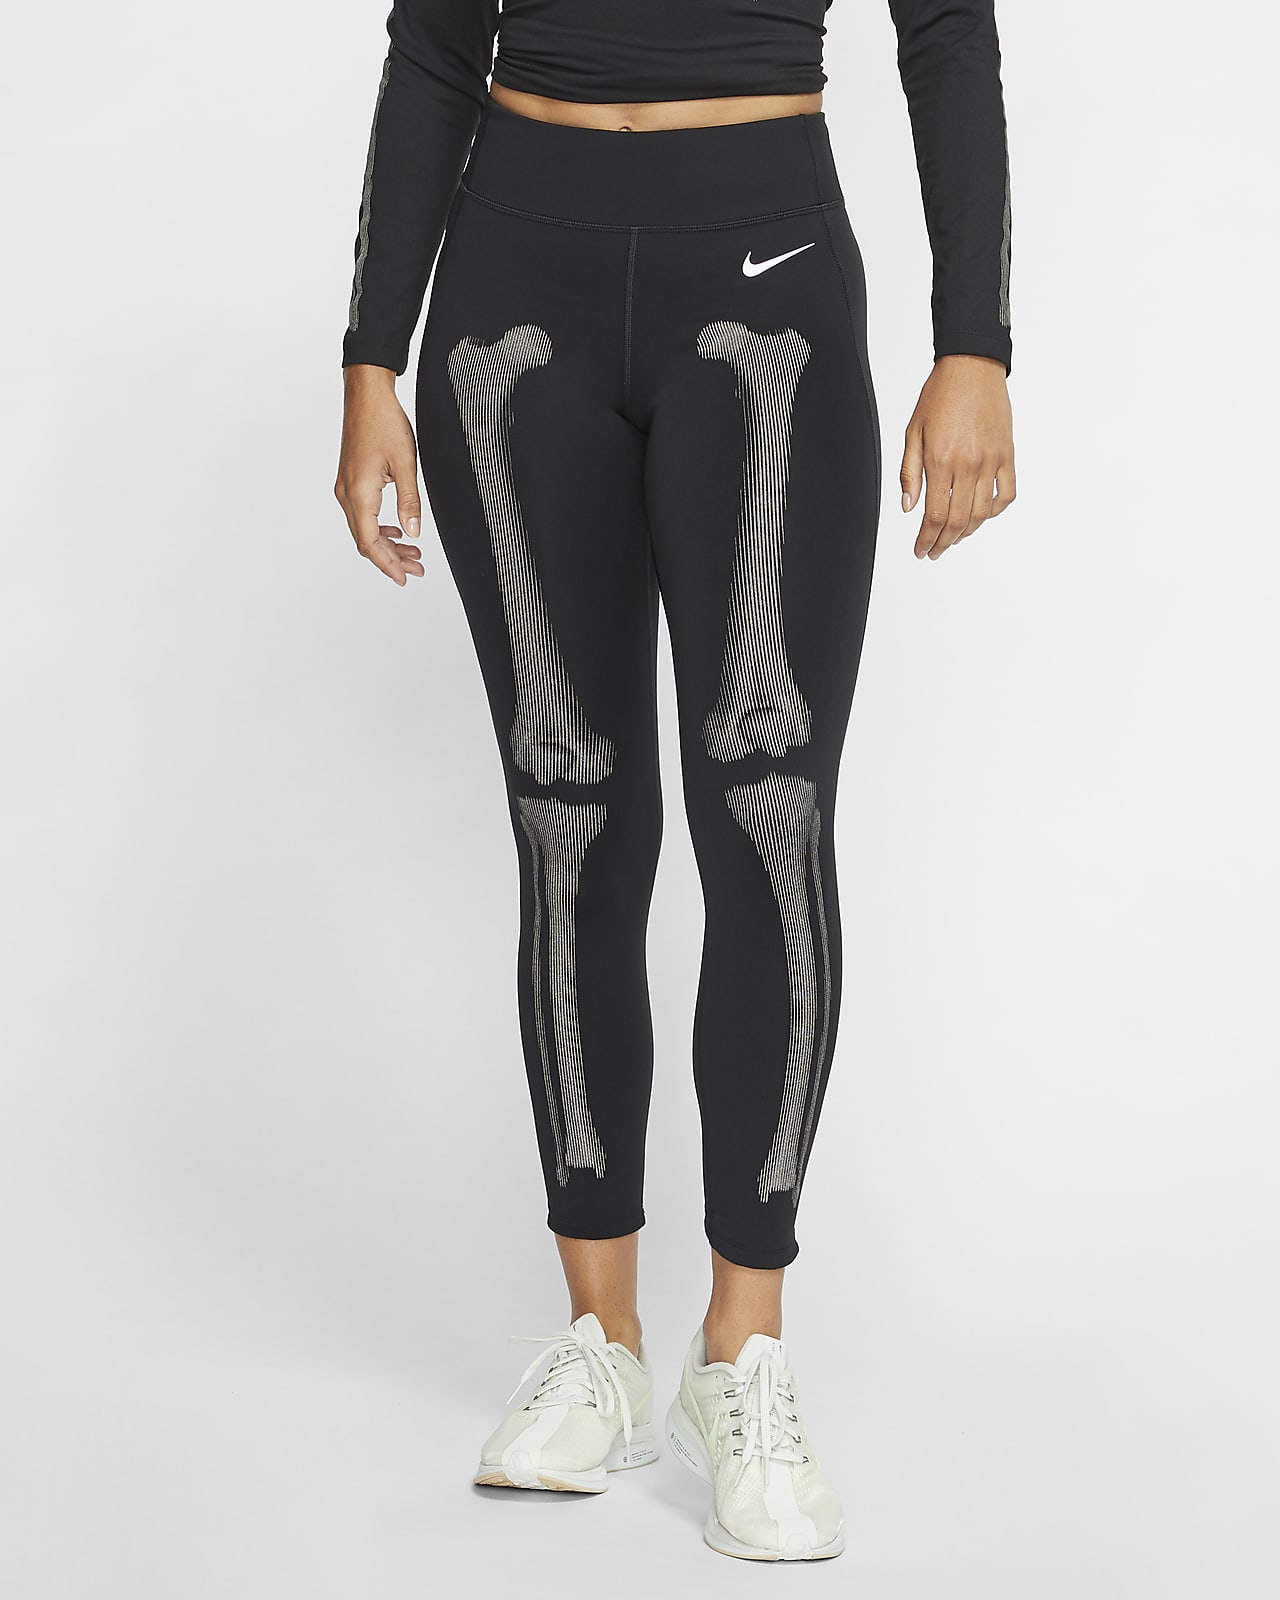 https://static.nike.com/a/images/t_PDP_1280_v1/f_auto,q_auto:eco/cr66mqf0vasxrbzigal9/womens-skeleton-tights-Vk85BB.png